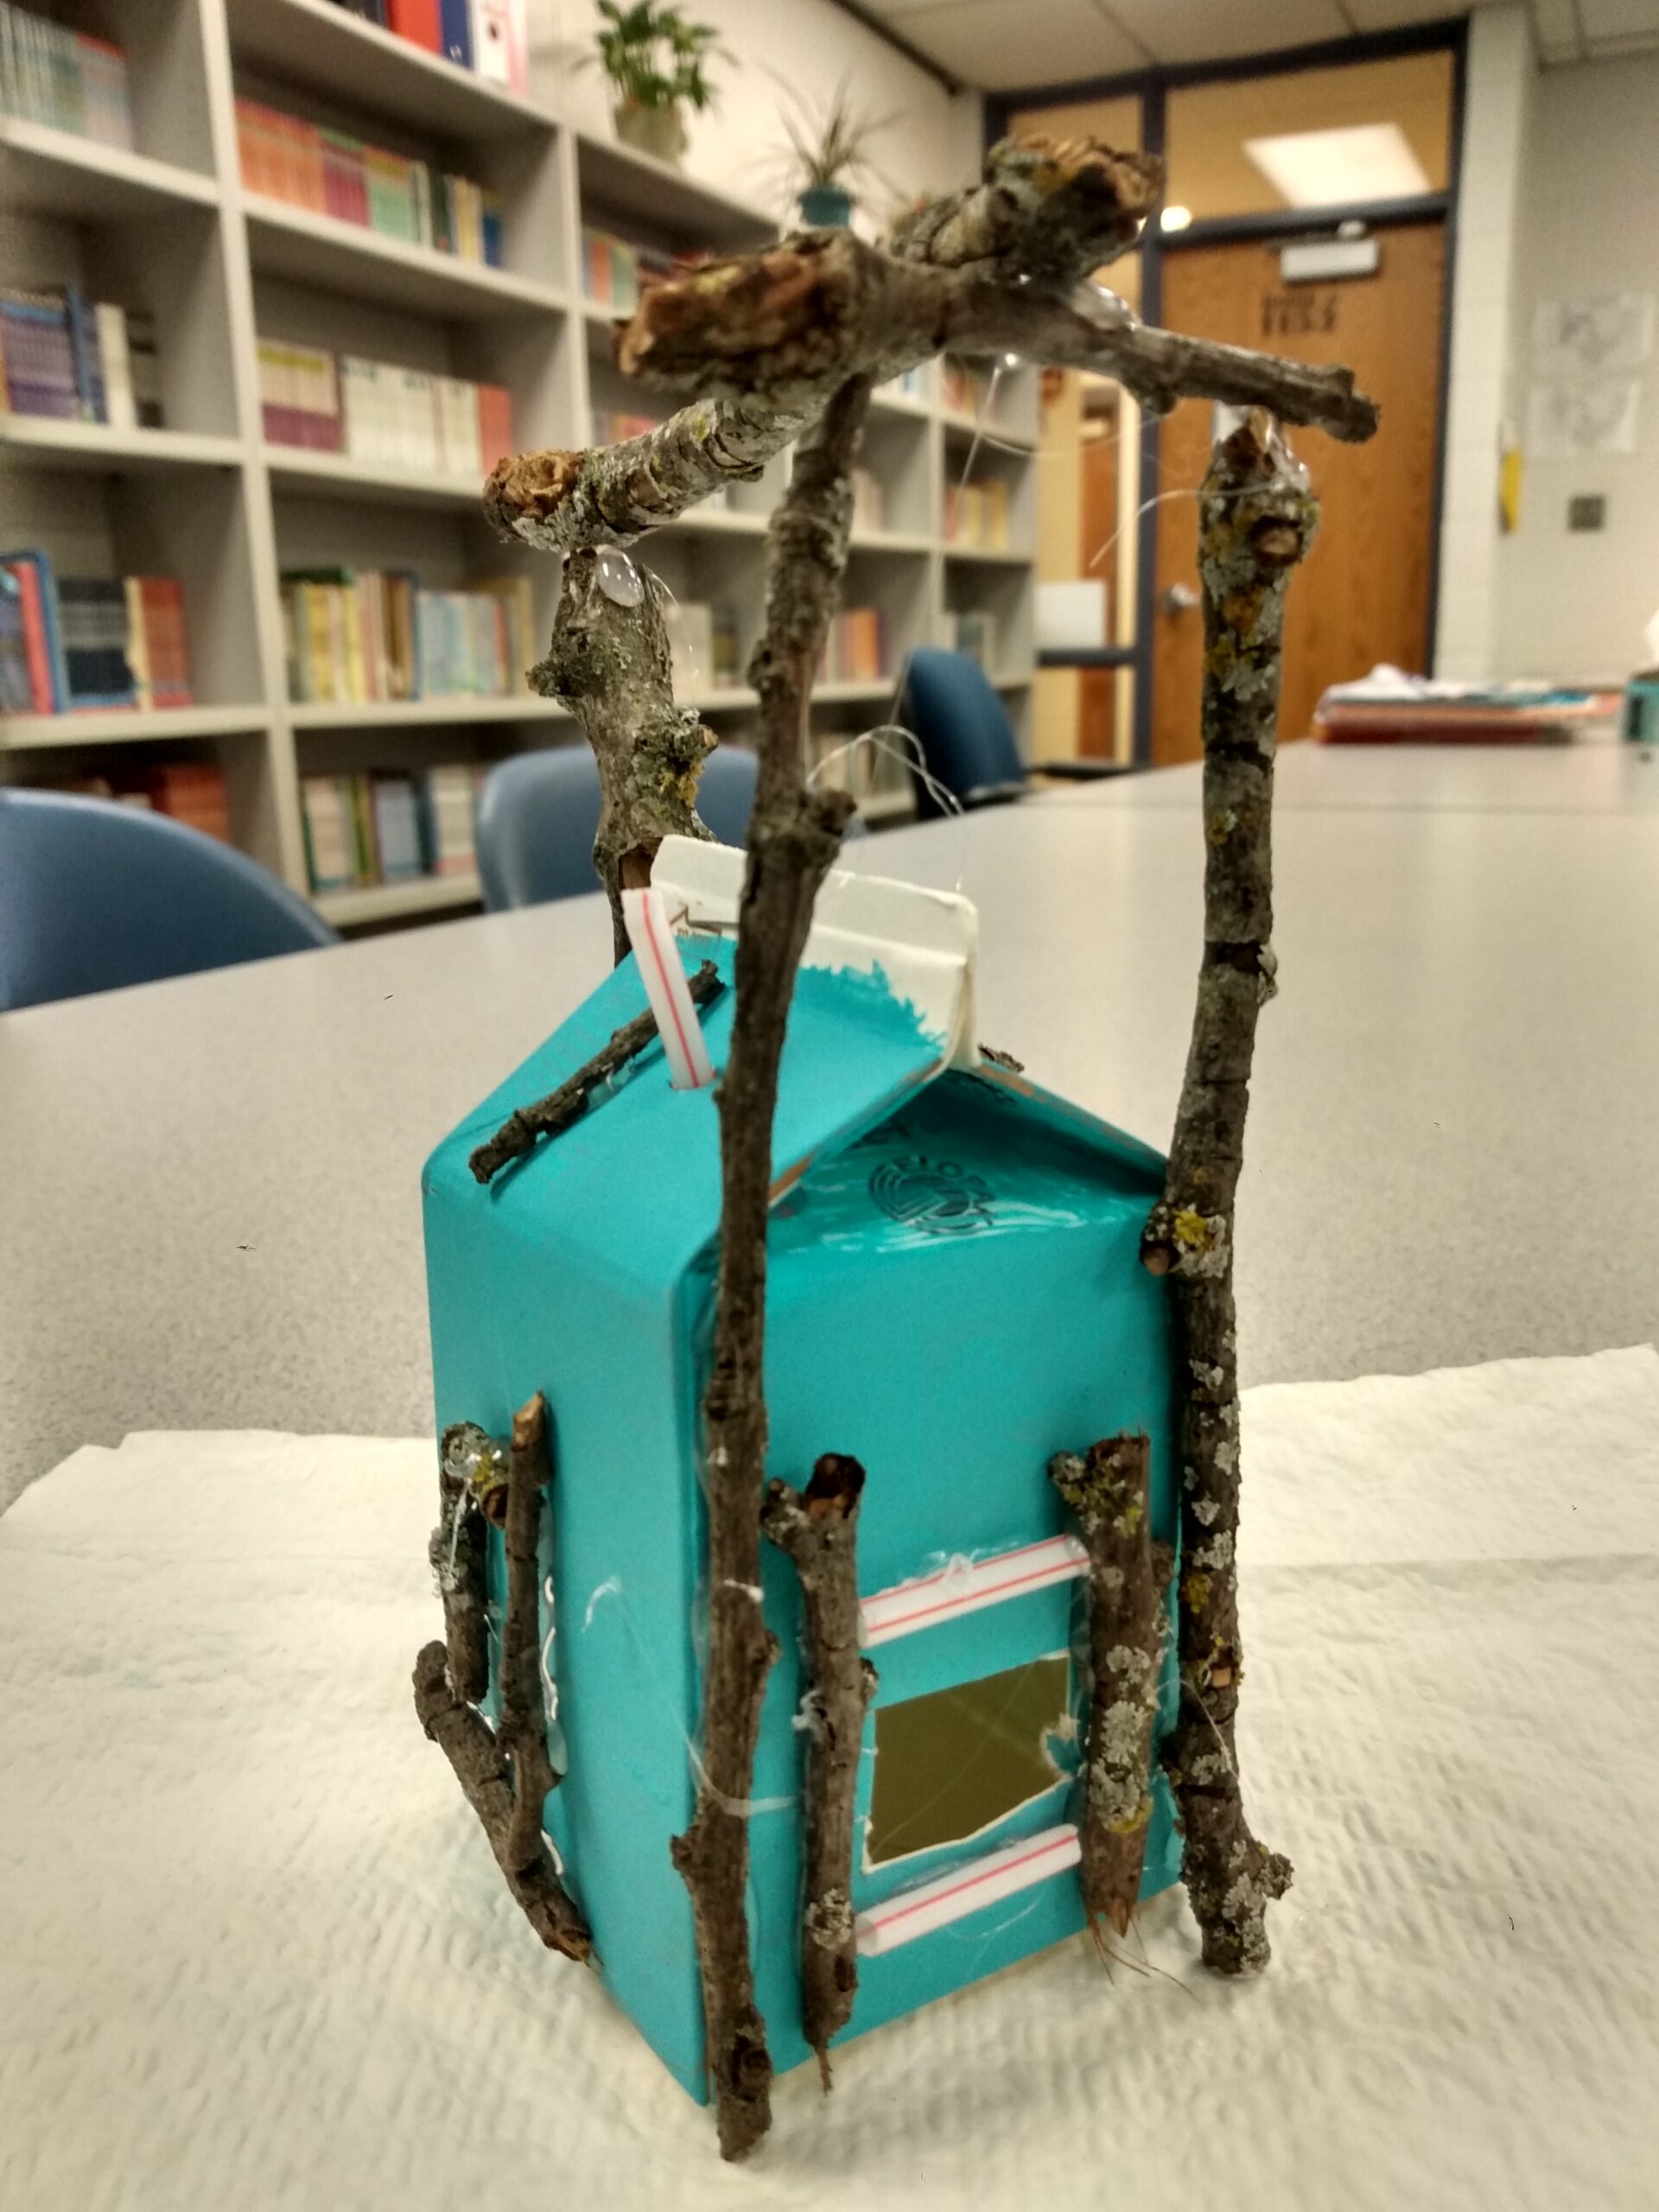 a used milk carton becomes an insect home with the help of sticks, straws and paint